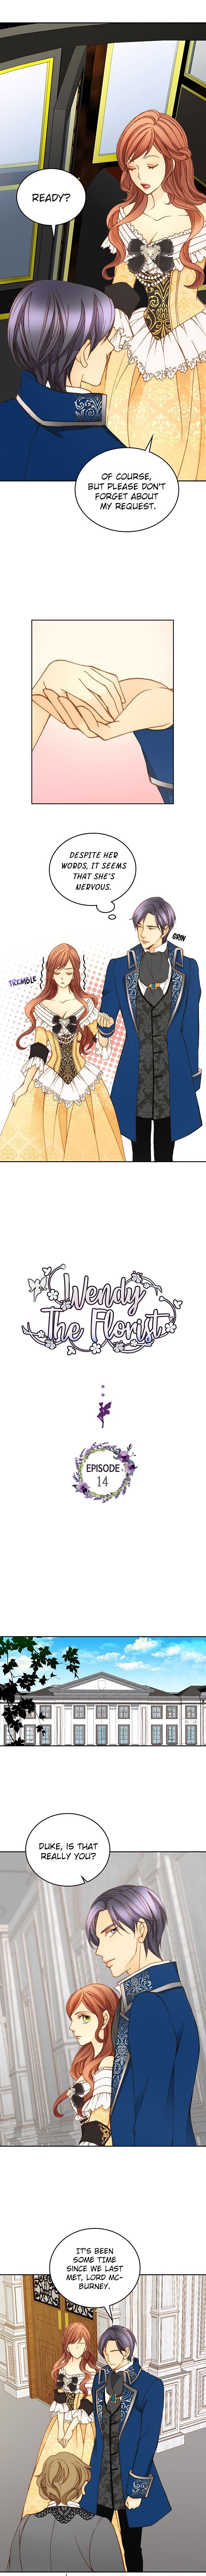 Wendy The Florist Chapter 14 page 1